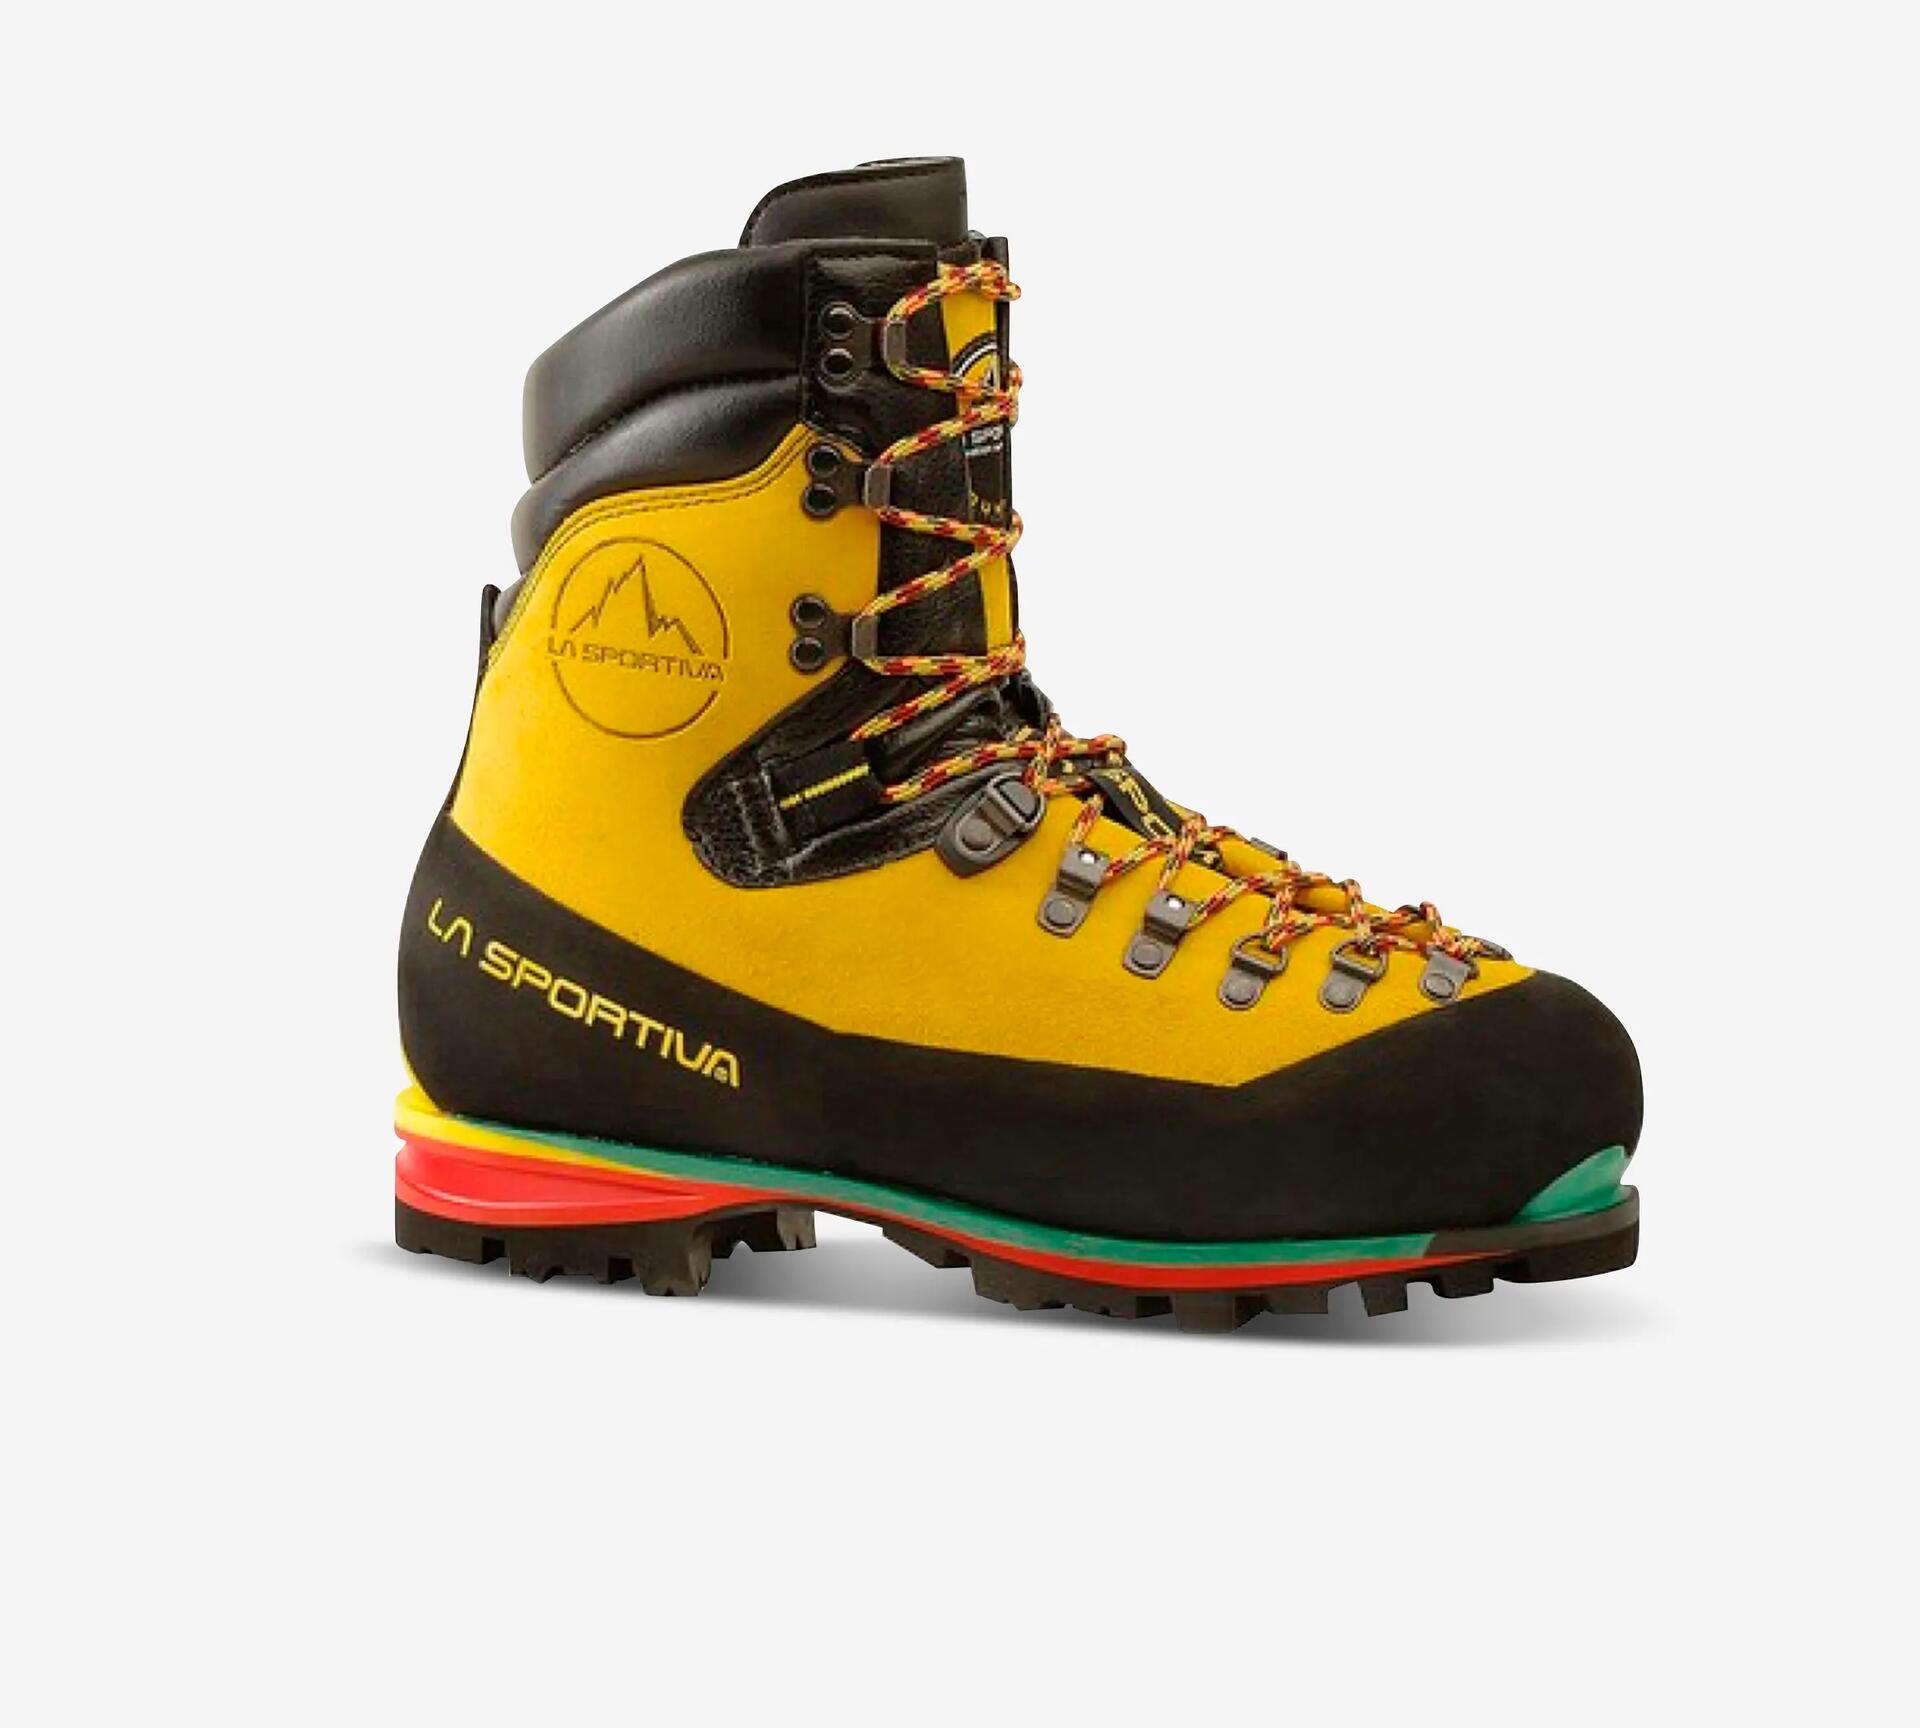 How to choose your mountaineering boots